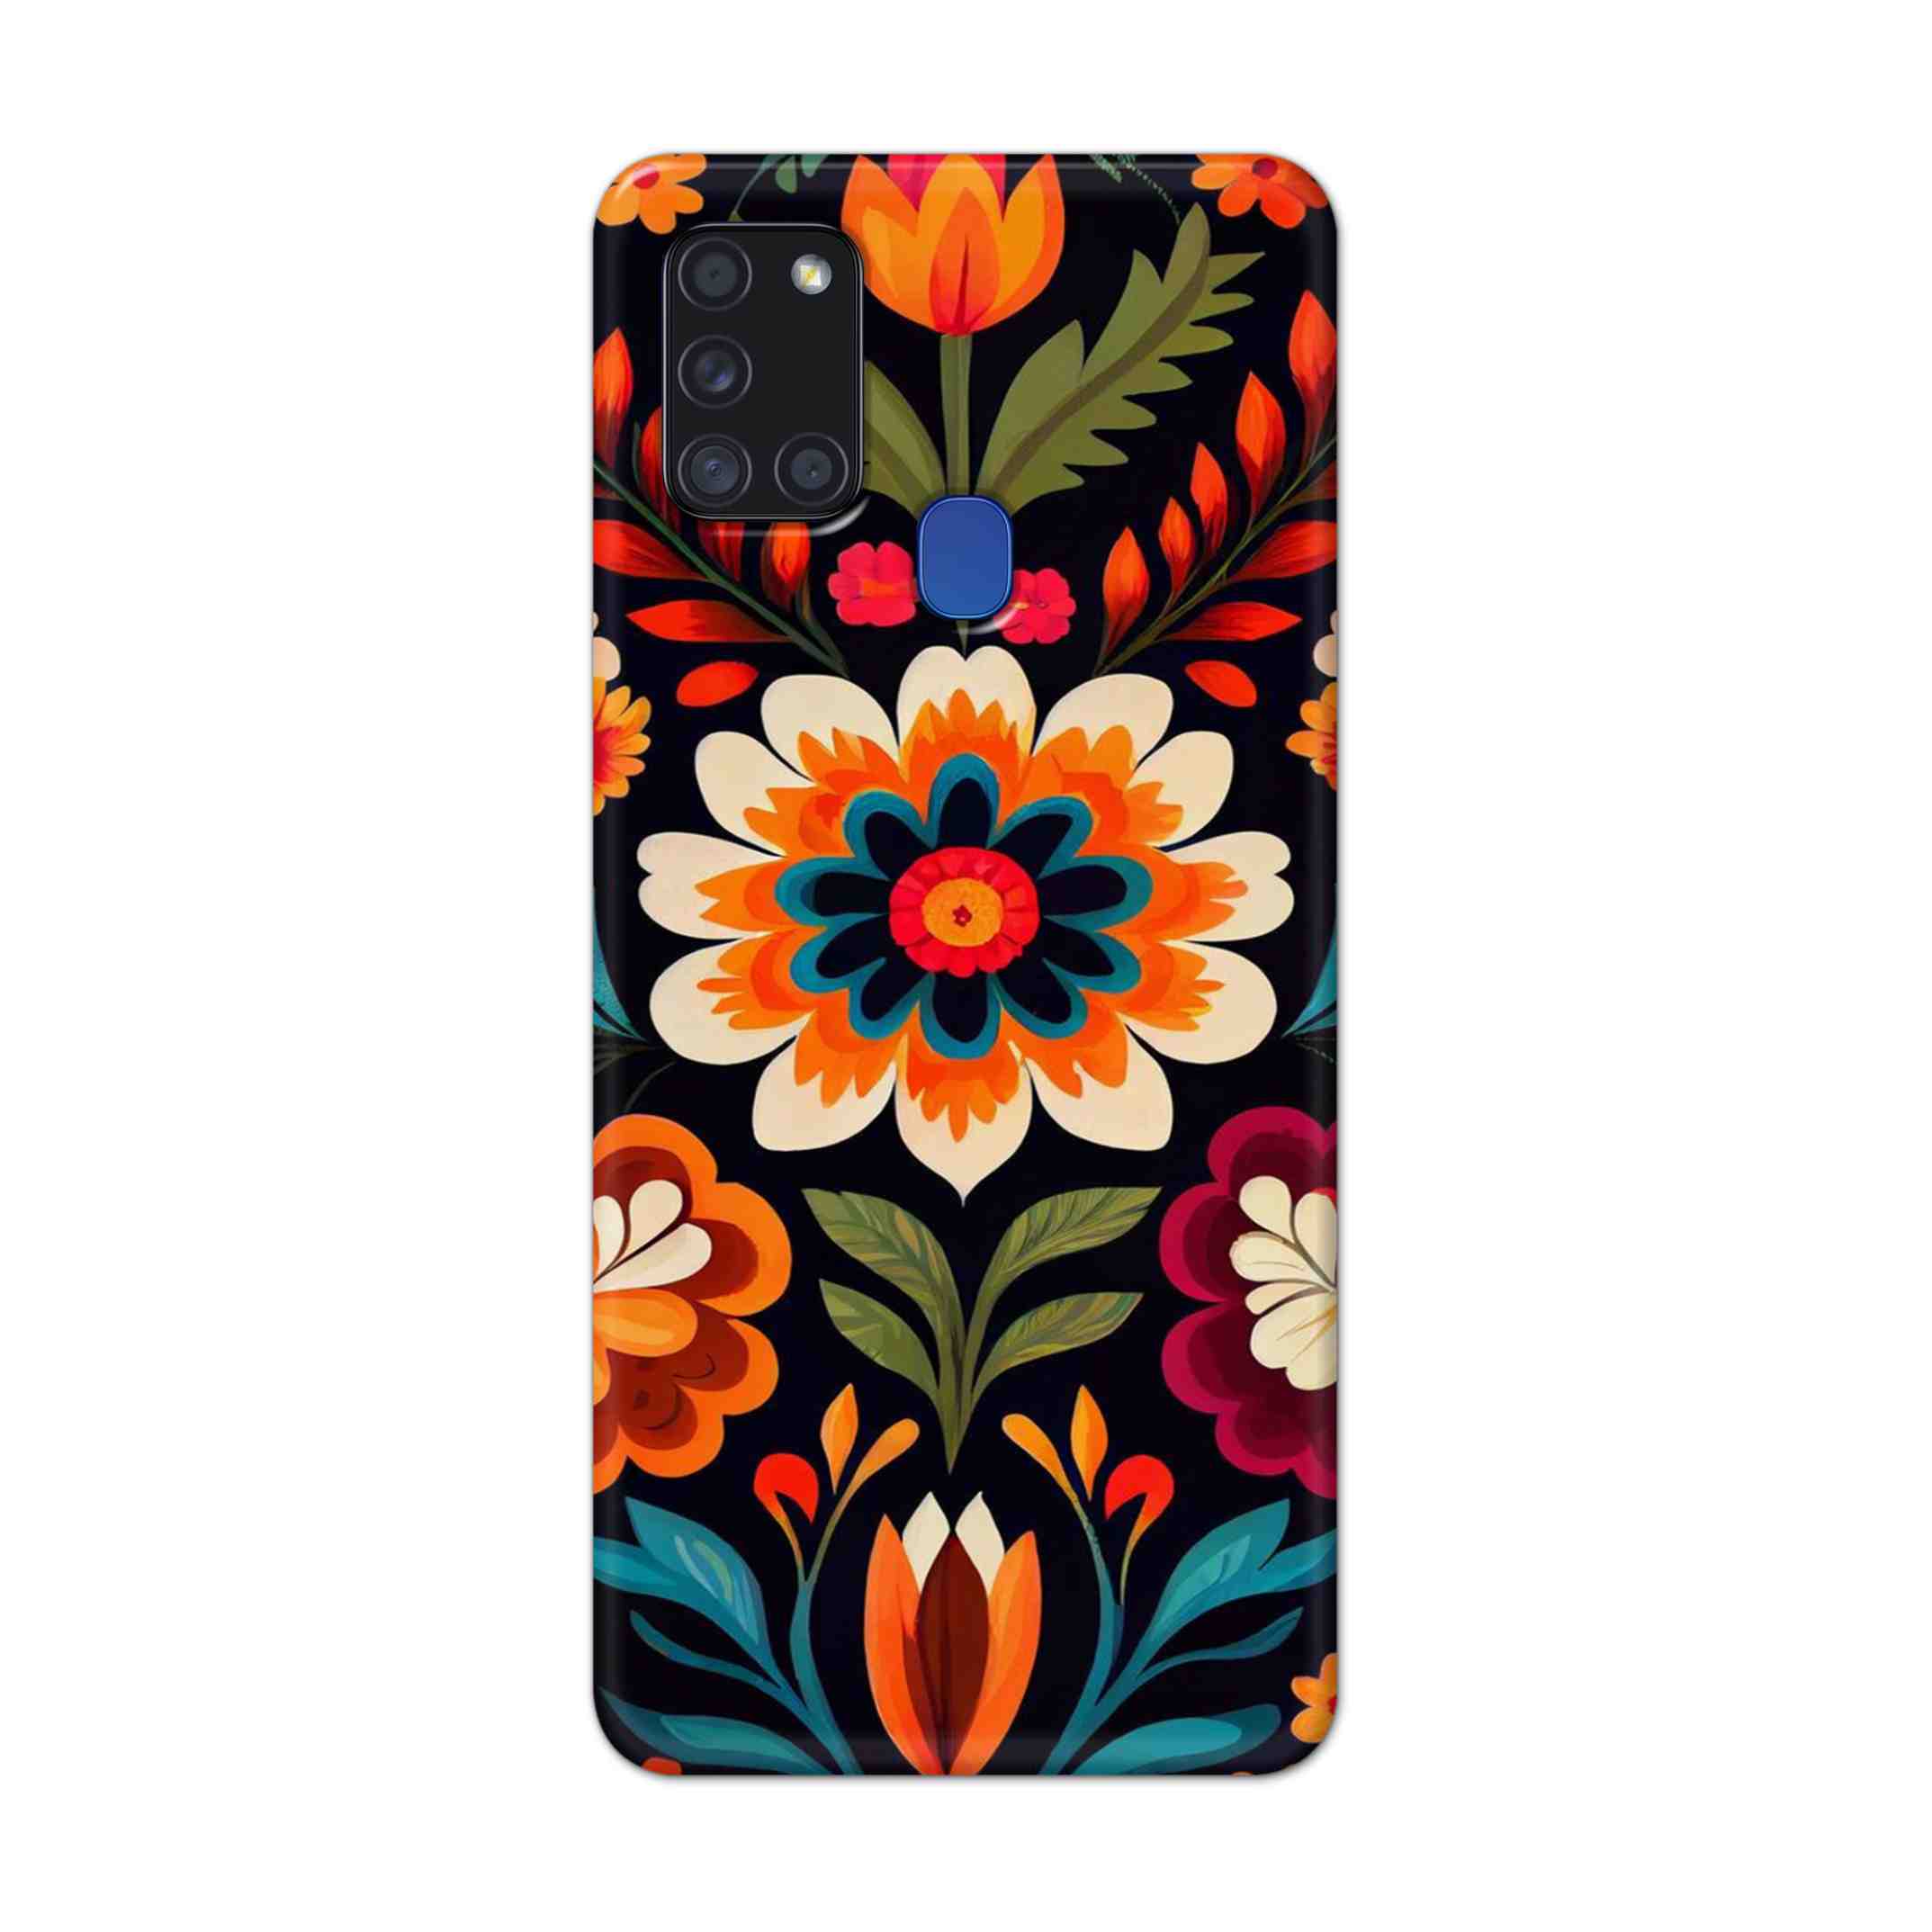 Buy Flower Hard Back Mobile Phone Case Cover For Samsung Galaxy A21s Online